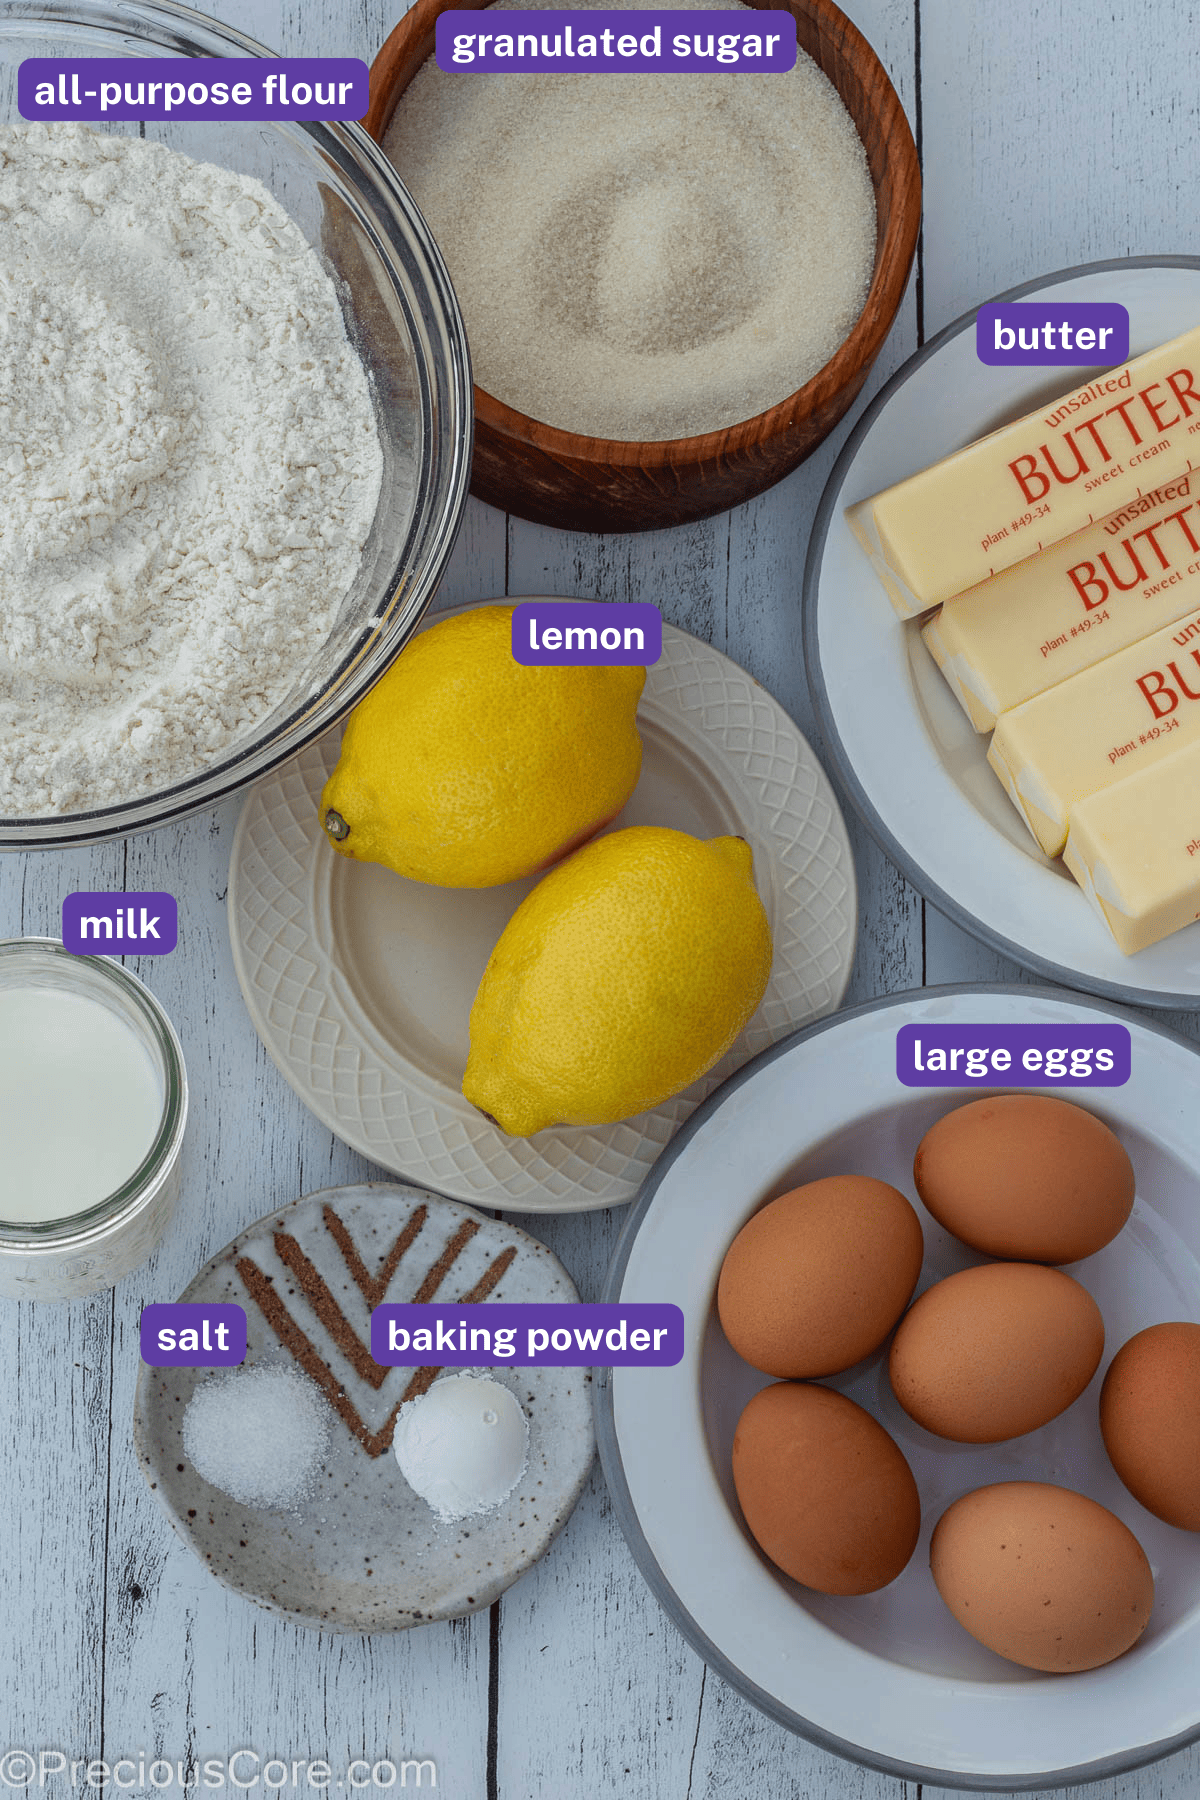 Ingredients for lemon pound cake with labels on them.